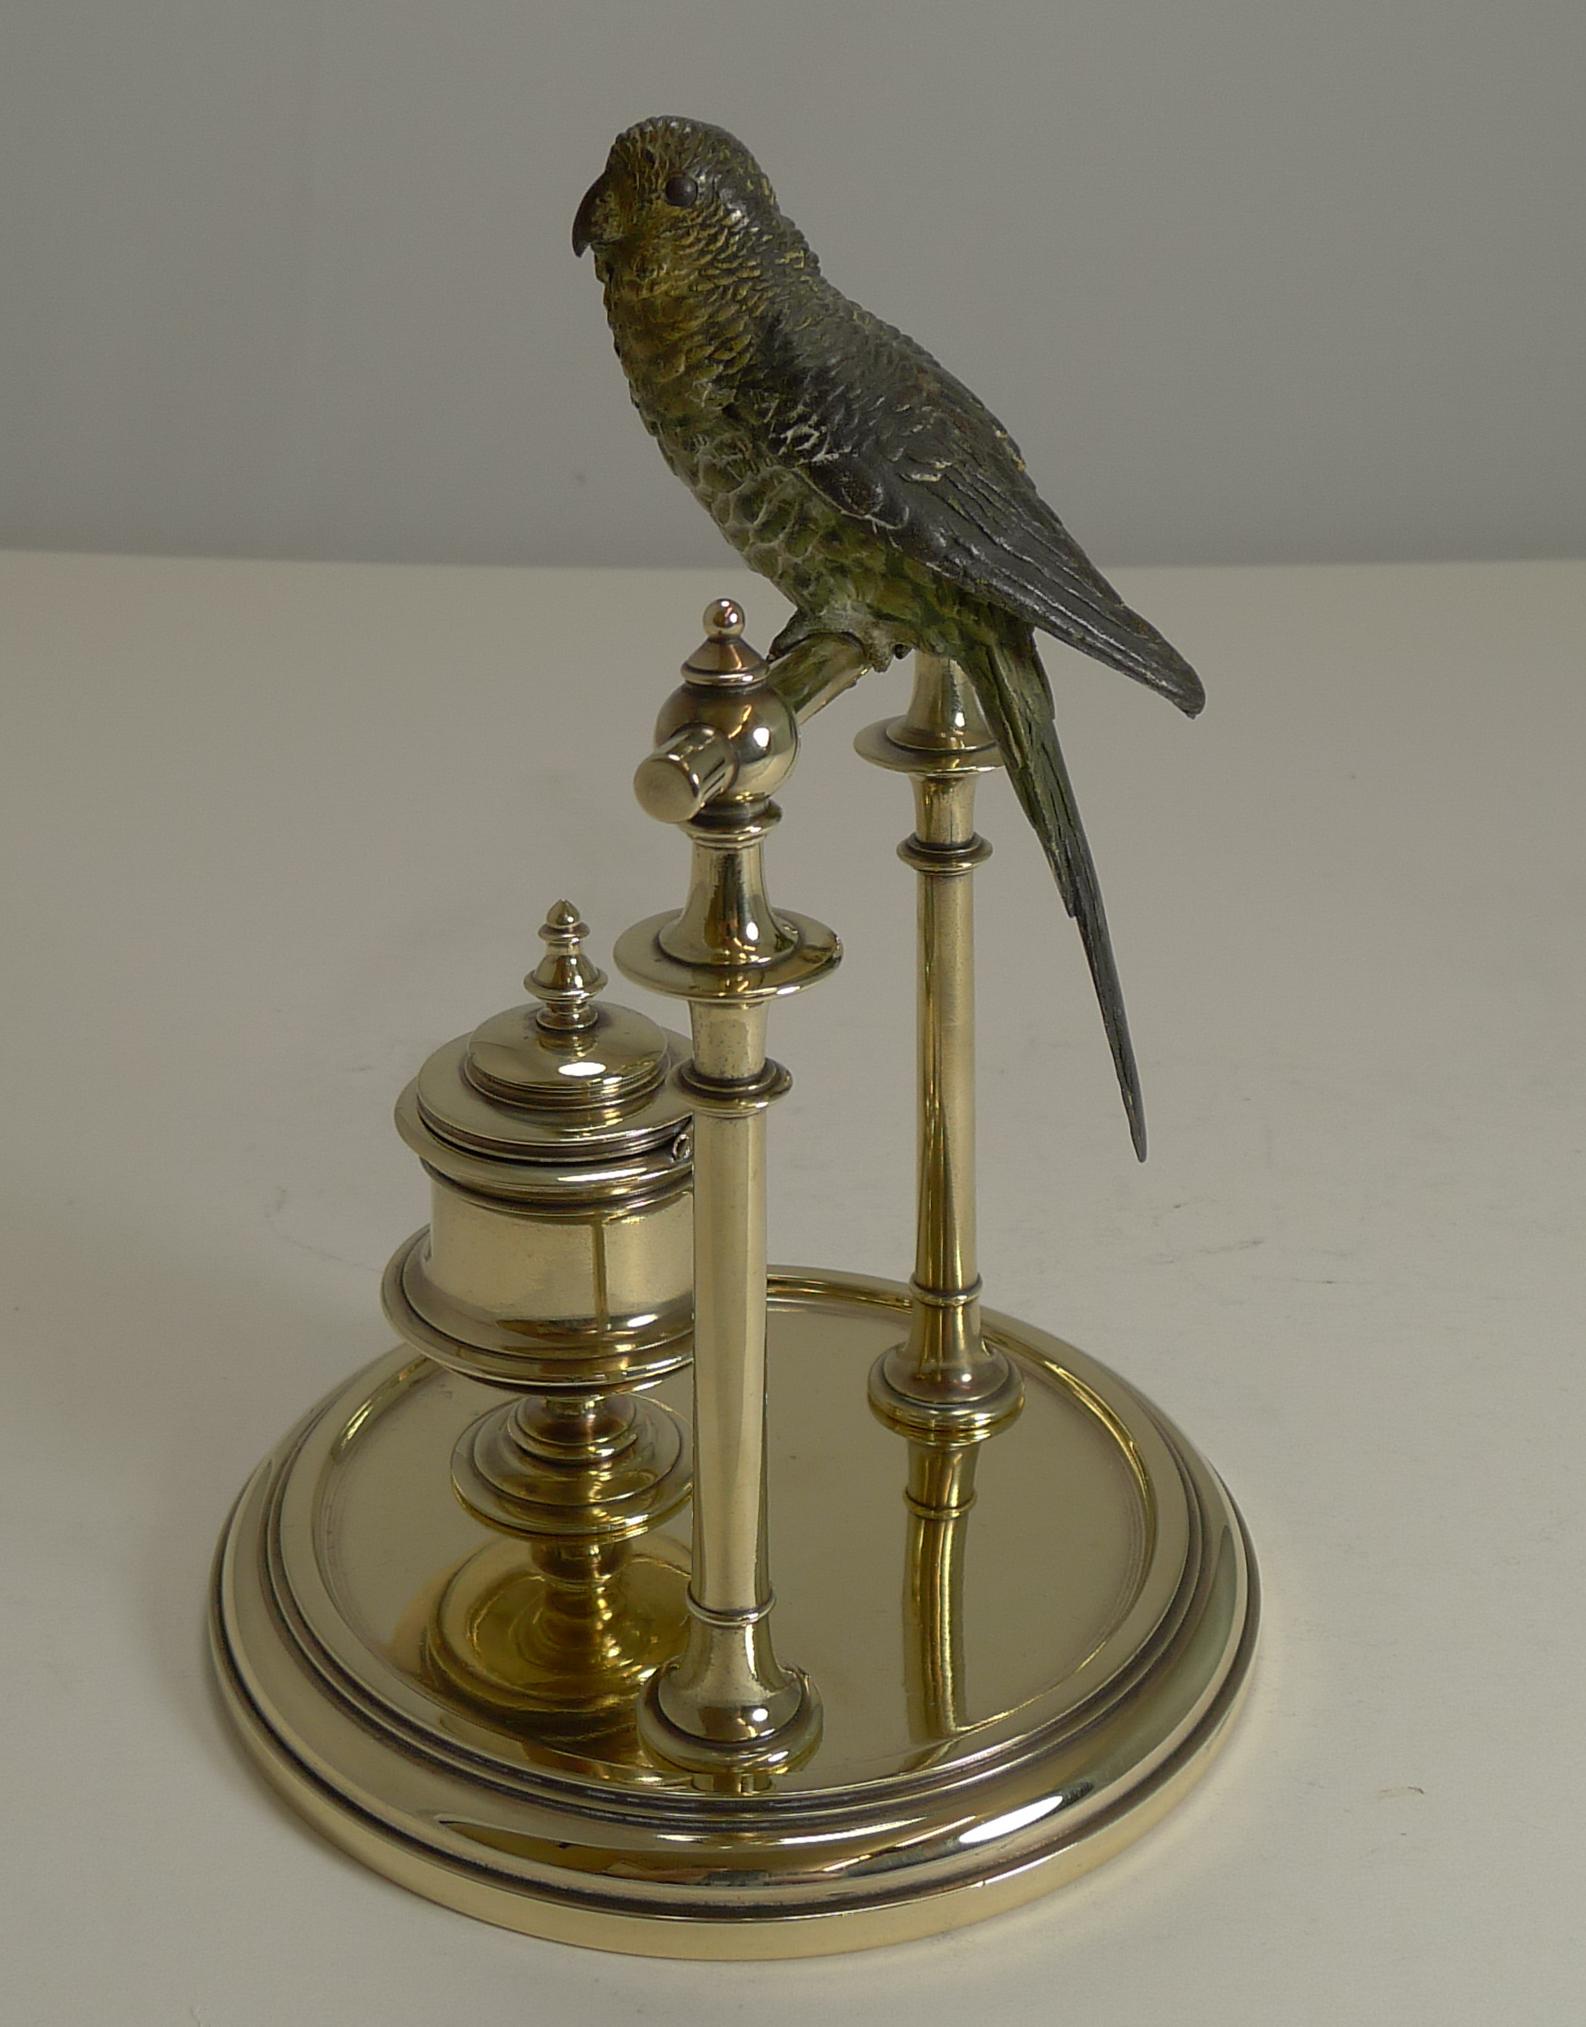 Late Victorian Antique Cold Painted Bronze Budgerigar / Parakeet Inkwell, circa 1890